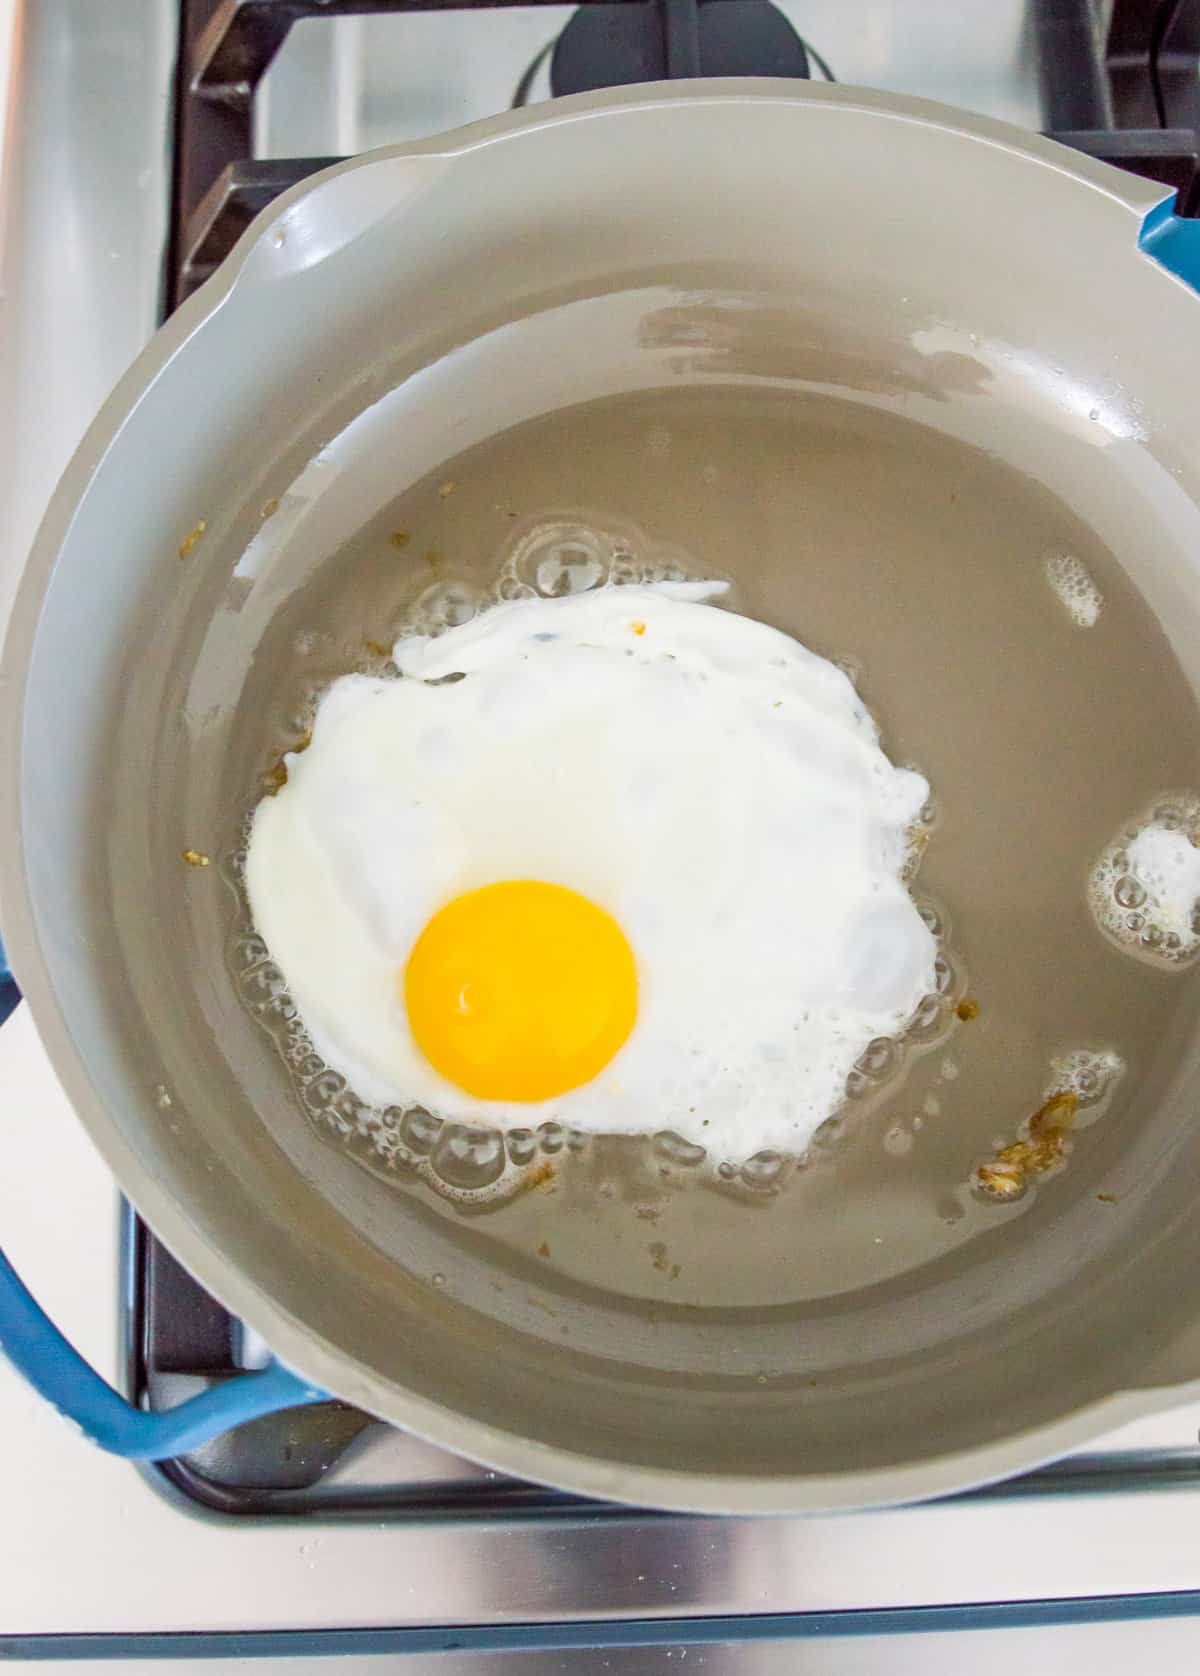 An egg being fried in a frying pan.